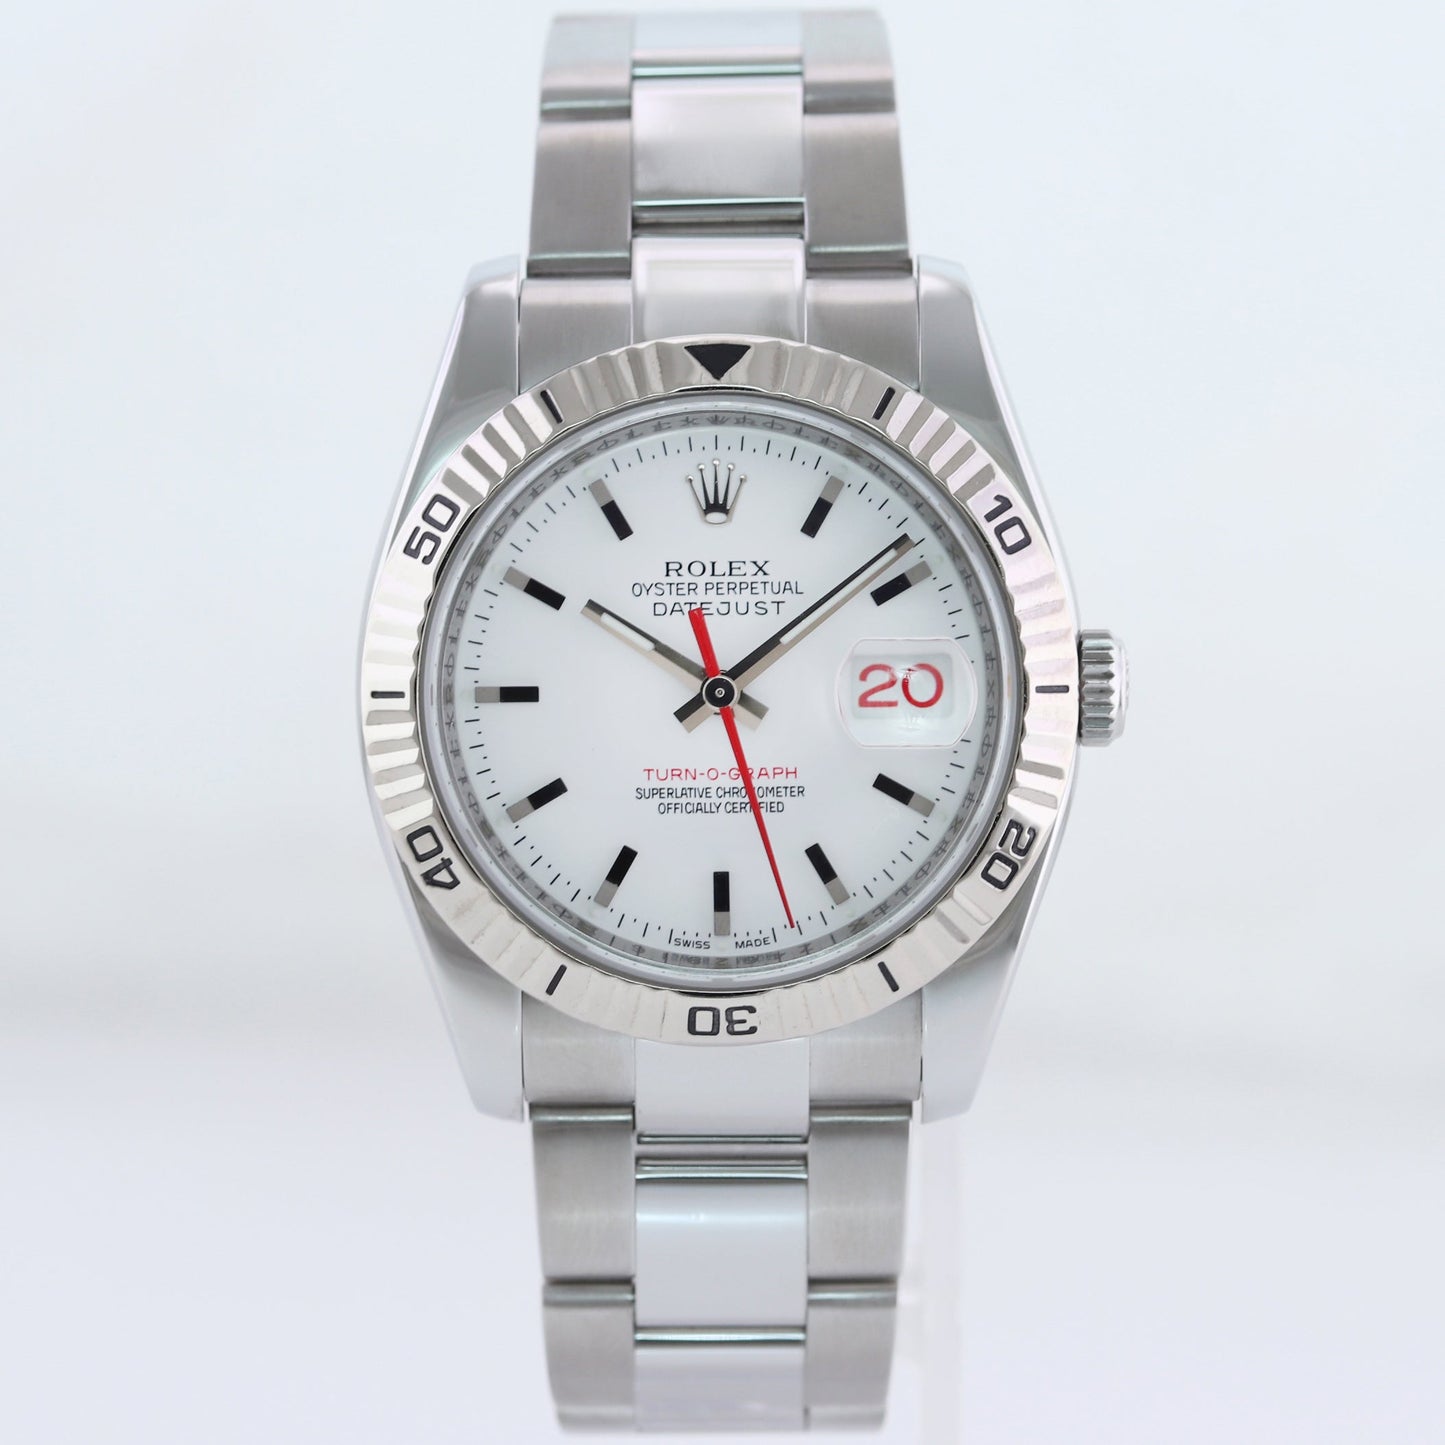 Rolex DateJust Turn-O-Graph 116264 Steel White Gold Fluted Bezel Red Hand Watch